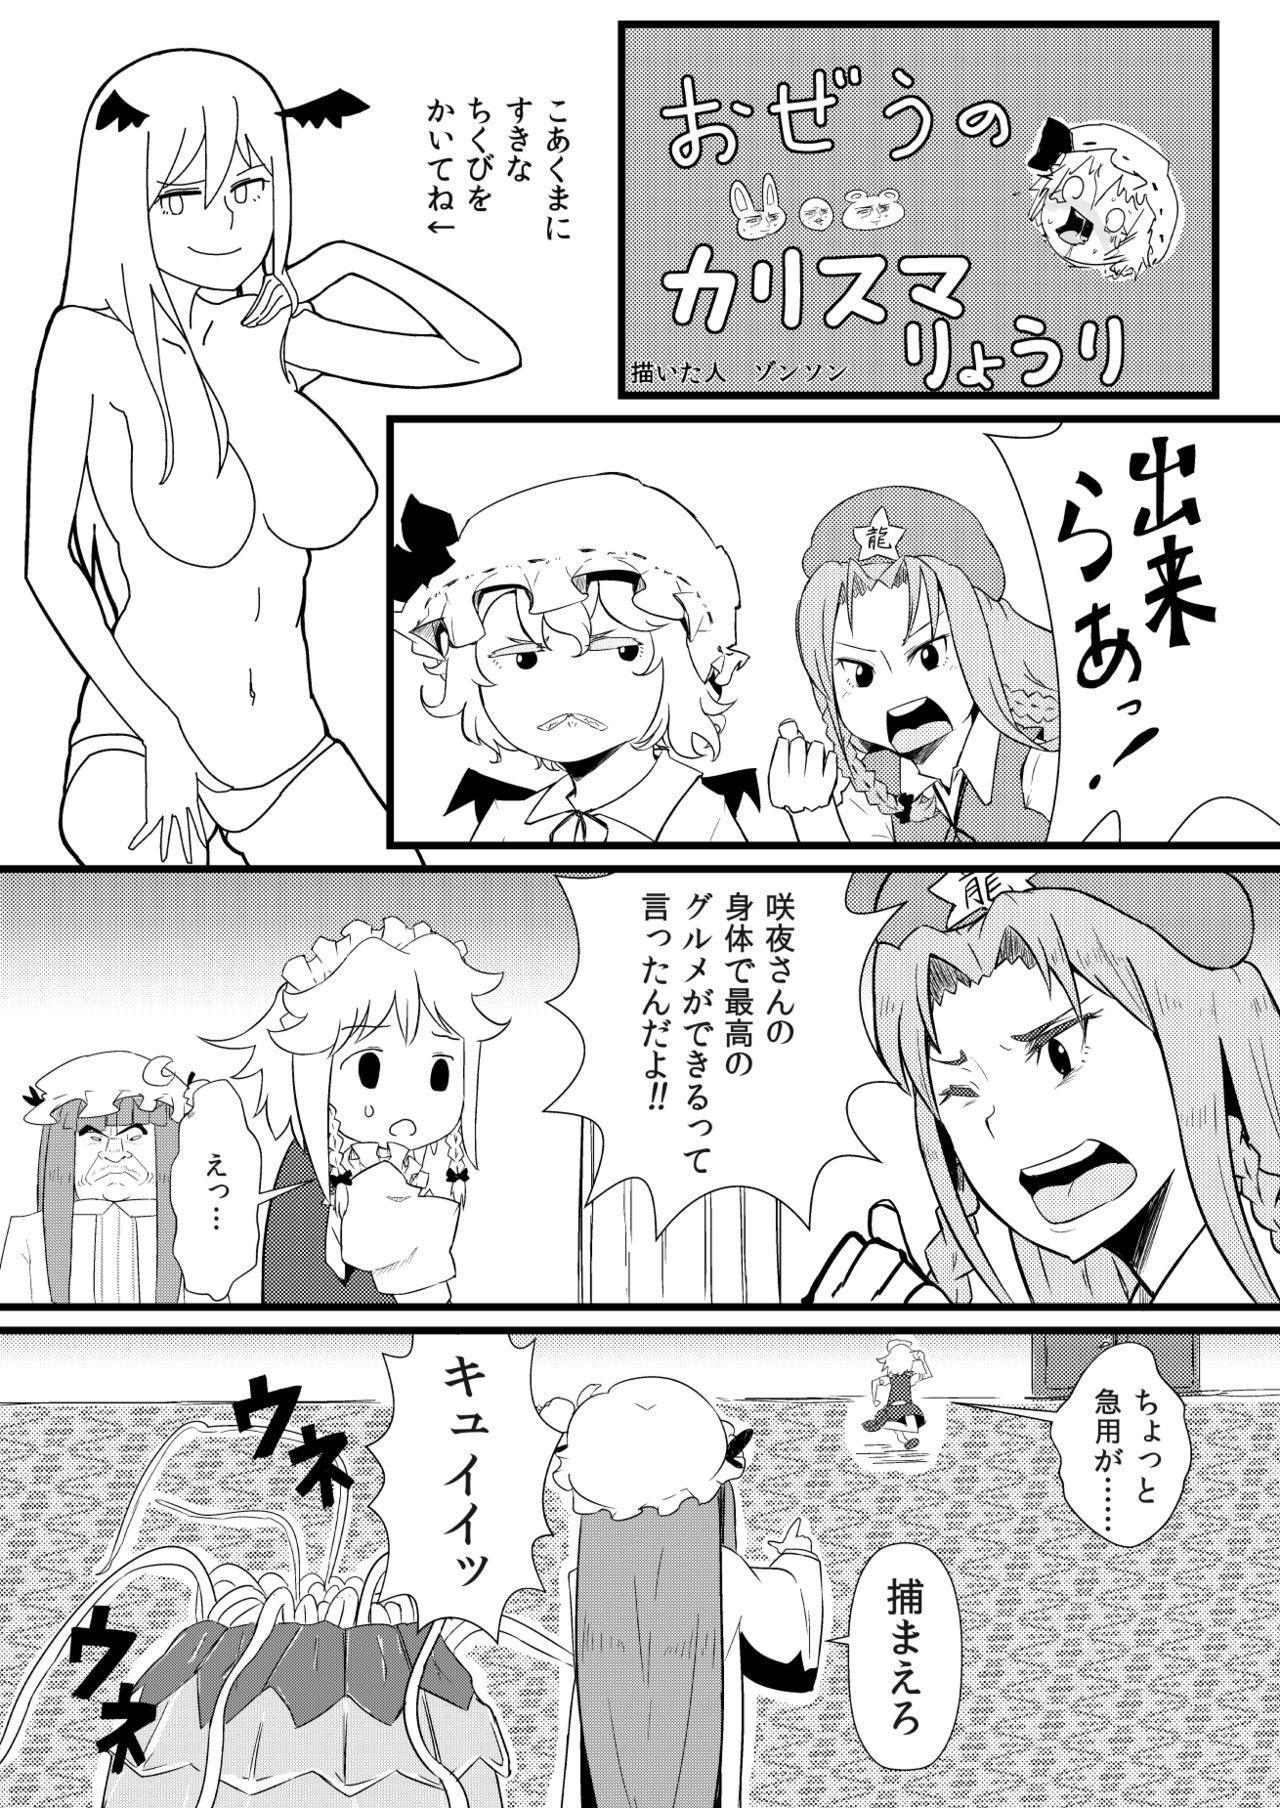 Outdoor 東方板としあき合同誌5 - Touhou project Cocks - Page 5